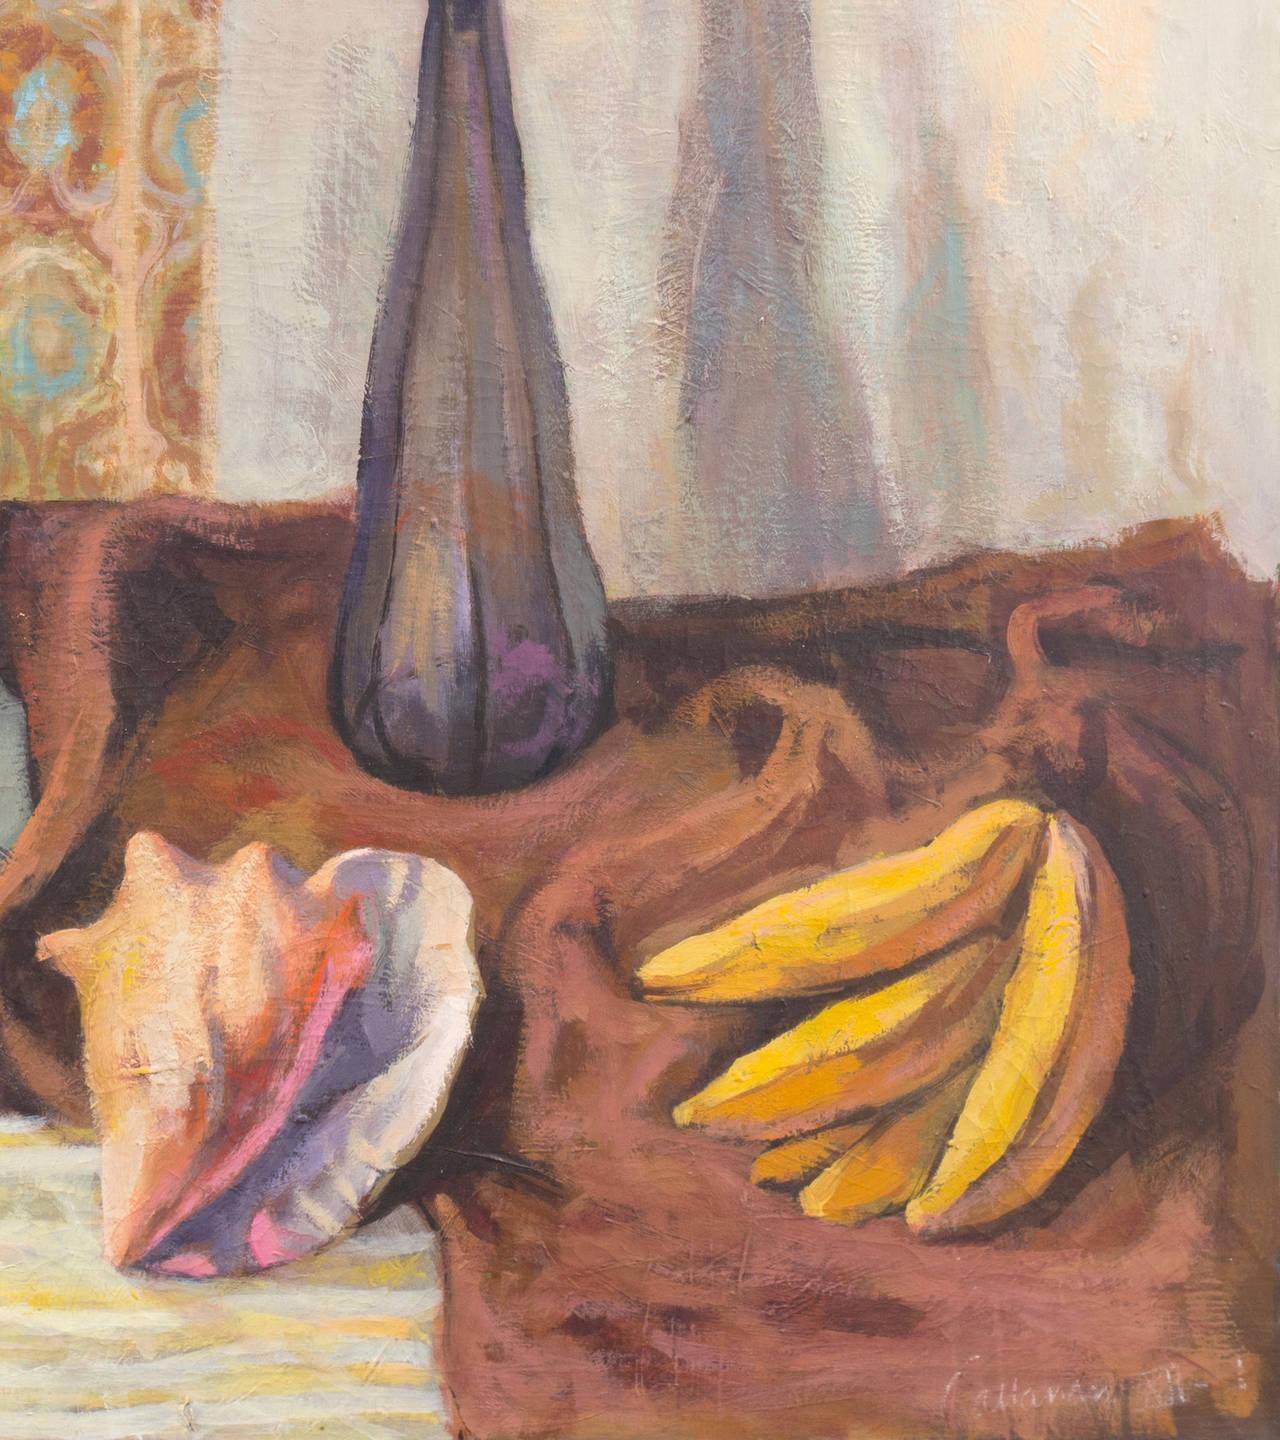 'Still Life with Conch Shell', Large Mid-Century American Post Impressionist Oil - Post-Impressionist Painting by Callanan